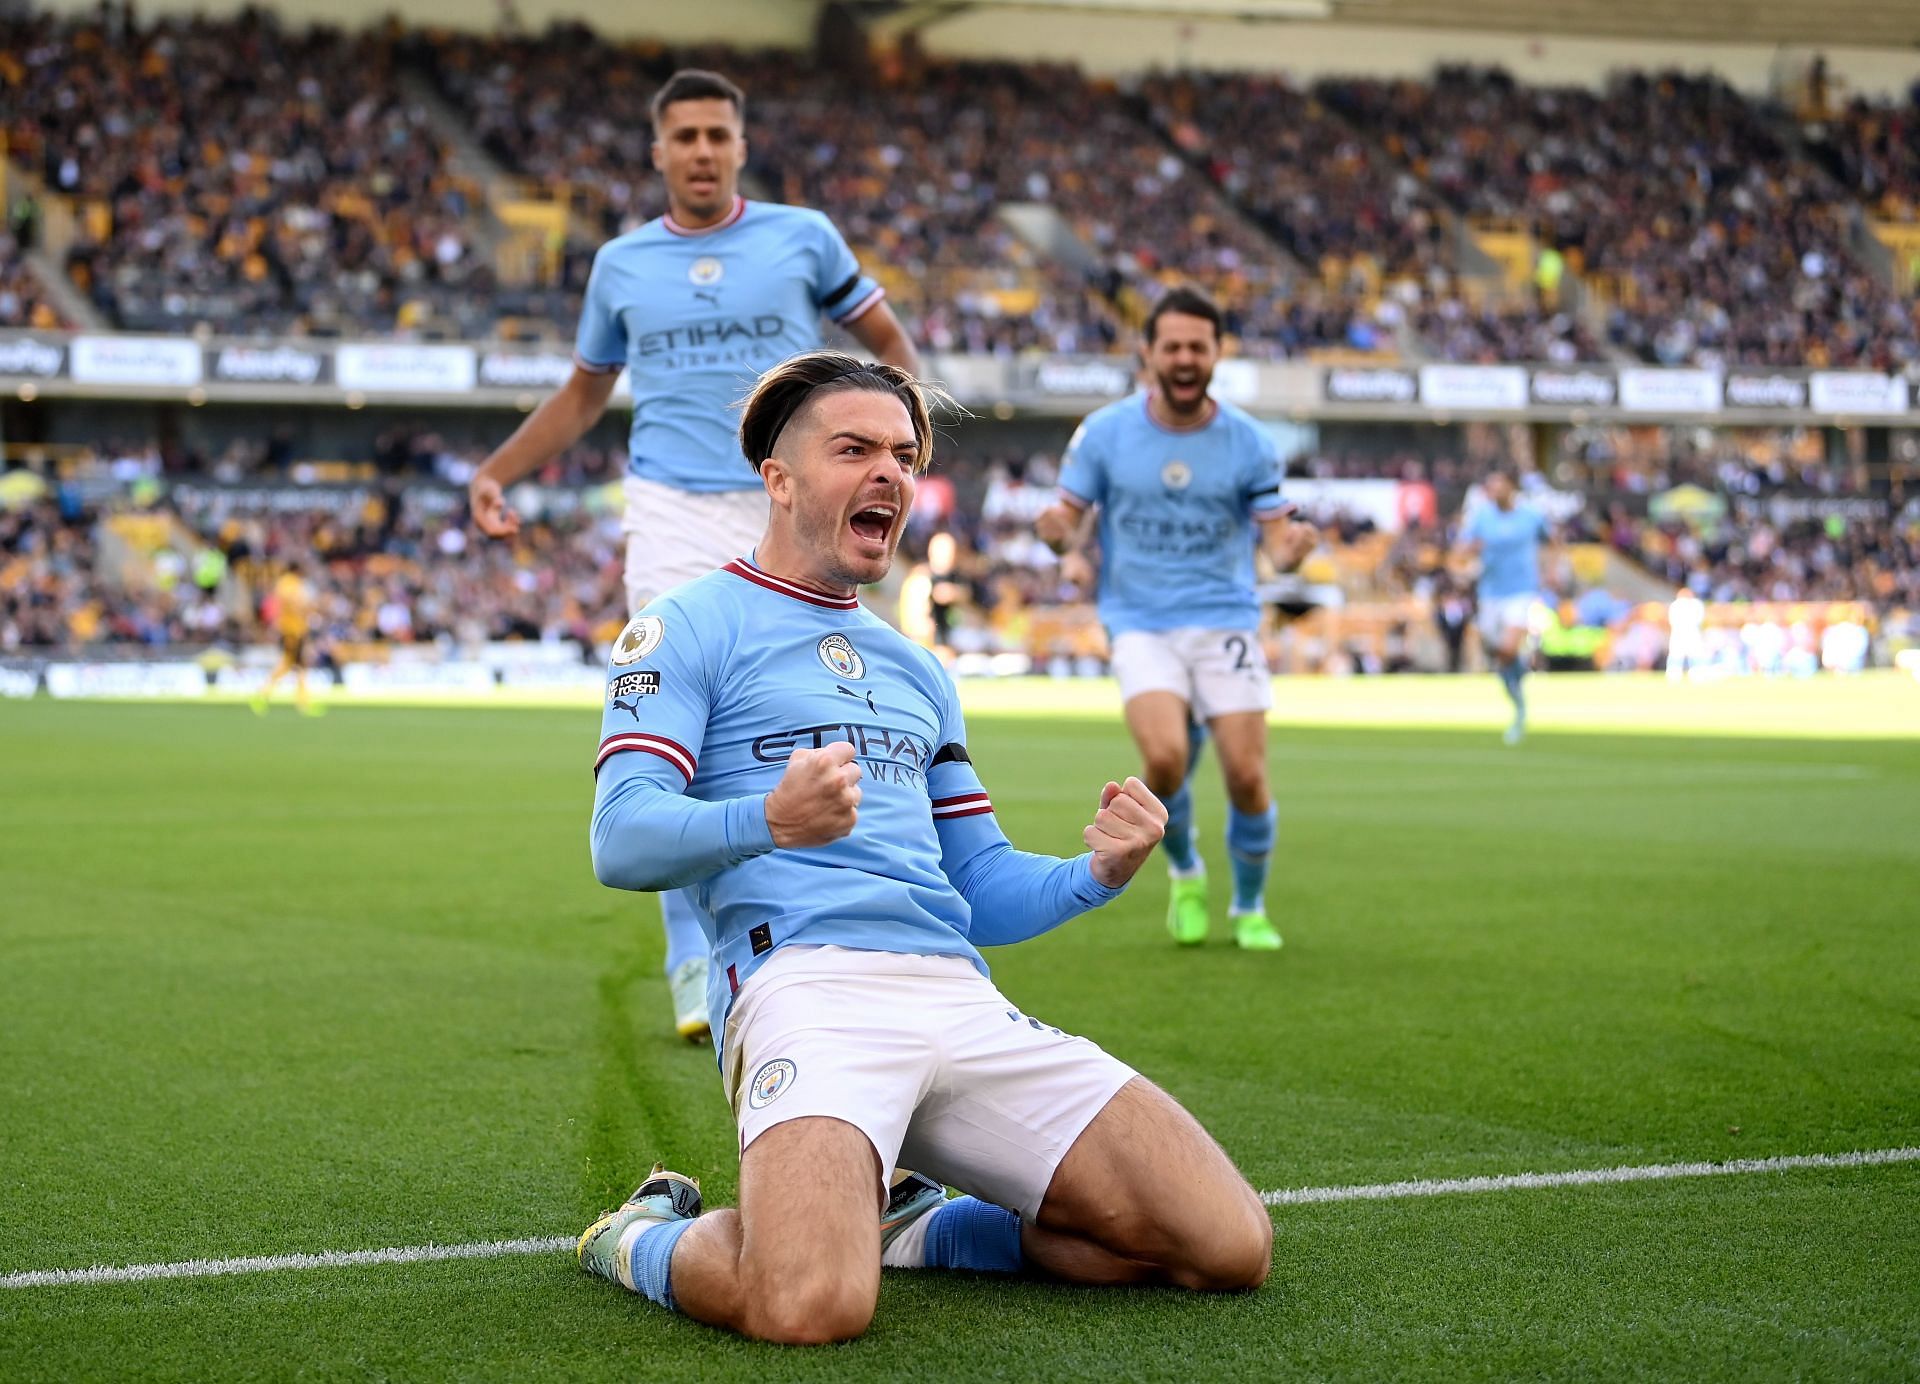 The Englishman opened the scoring for City during their 3-0 triumph over Wolves last weekend.